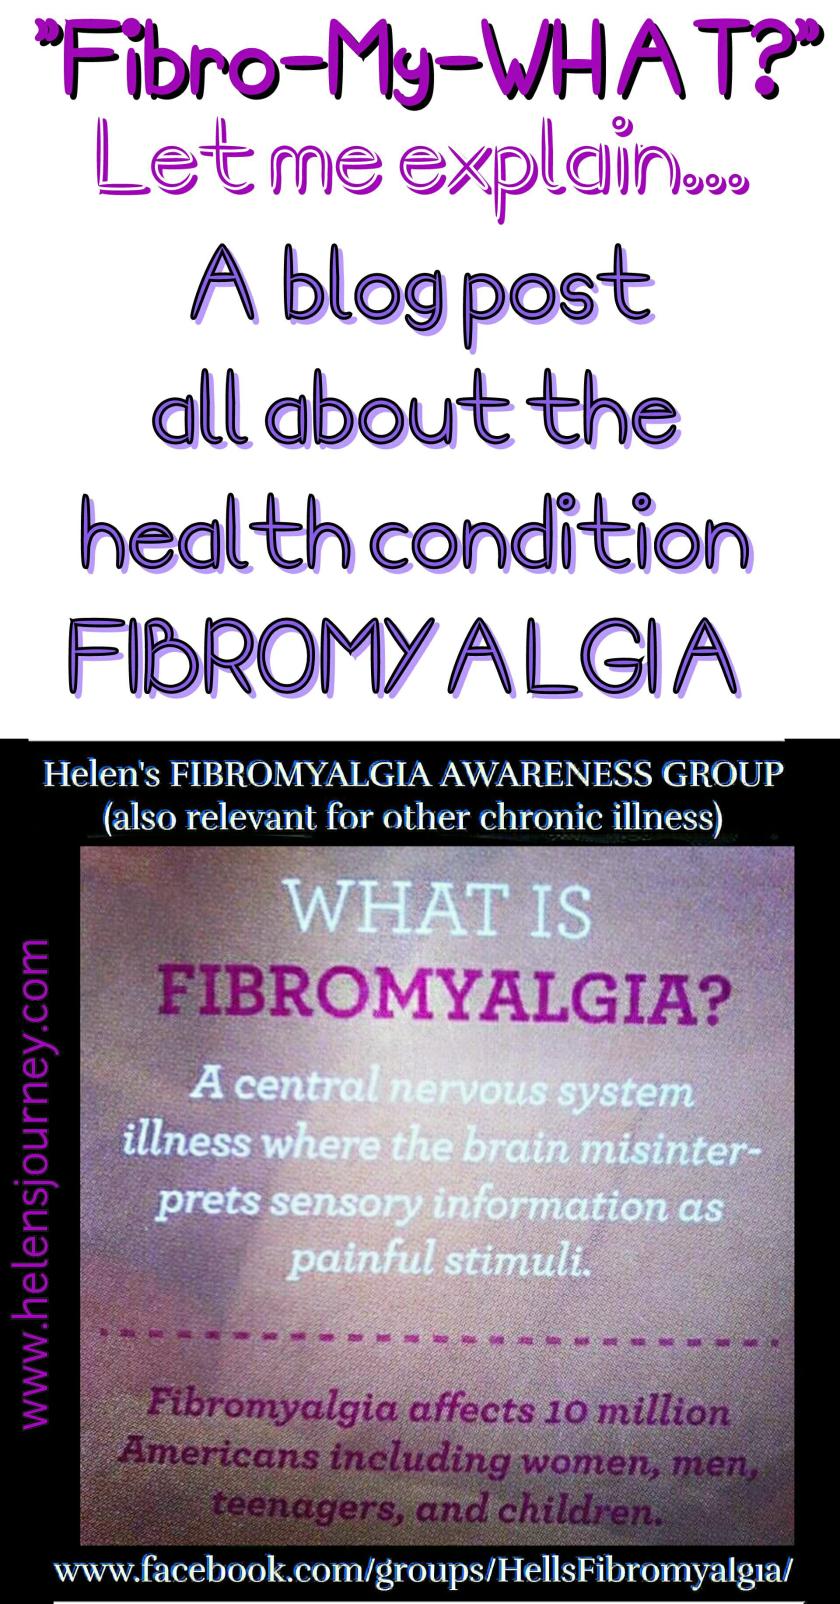 Fibro-My-What a blog post all about the health condition fibromyalgia by facebook chronic illness support group leader Helen's Journey